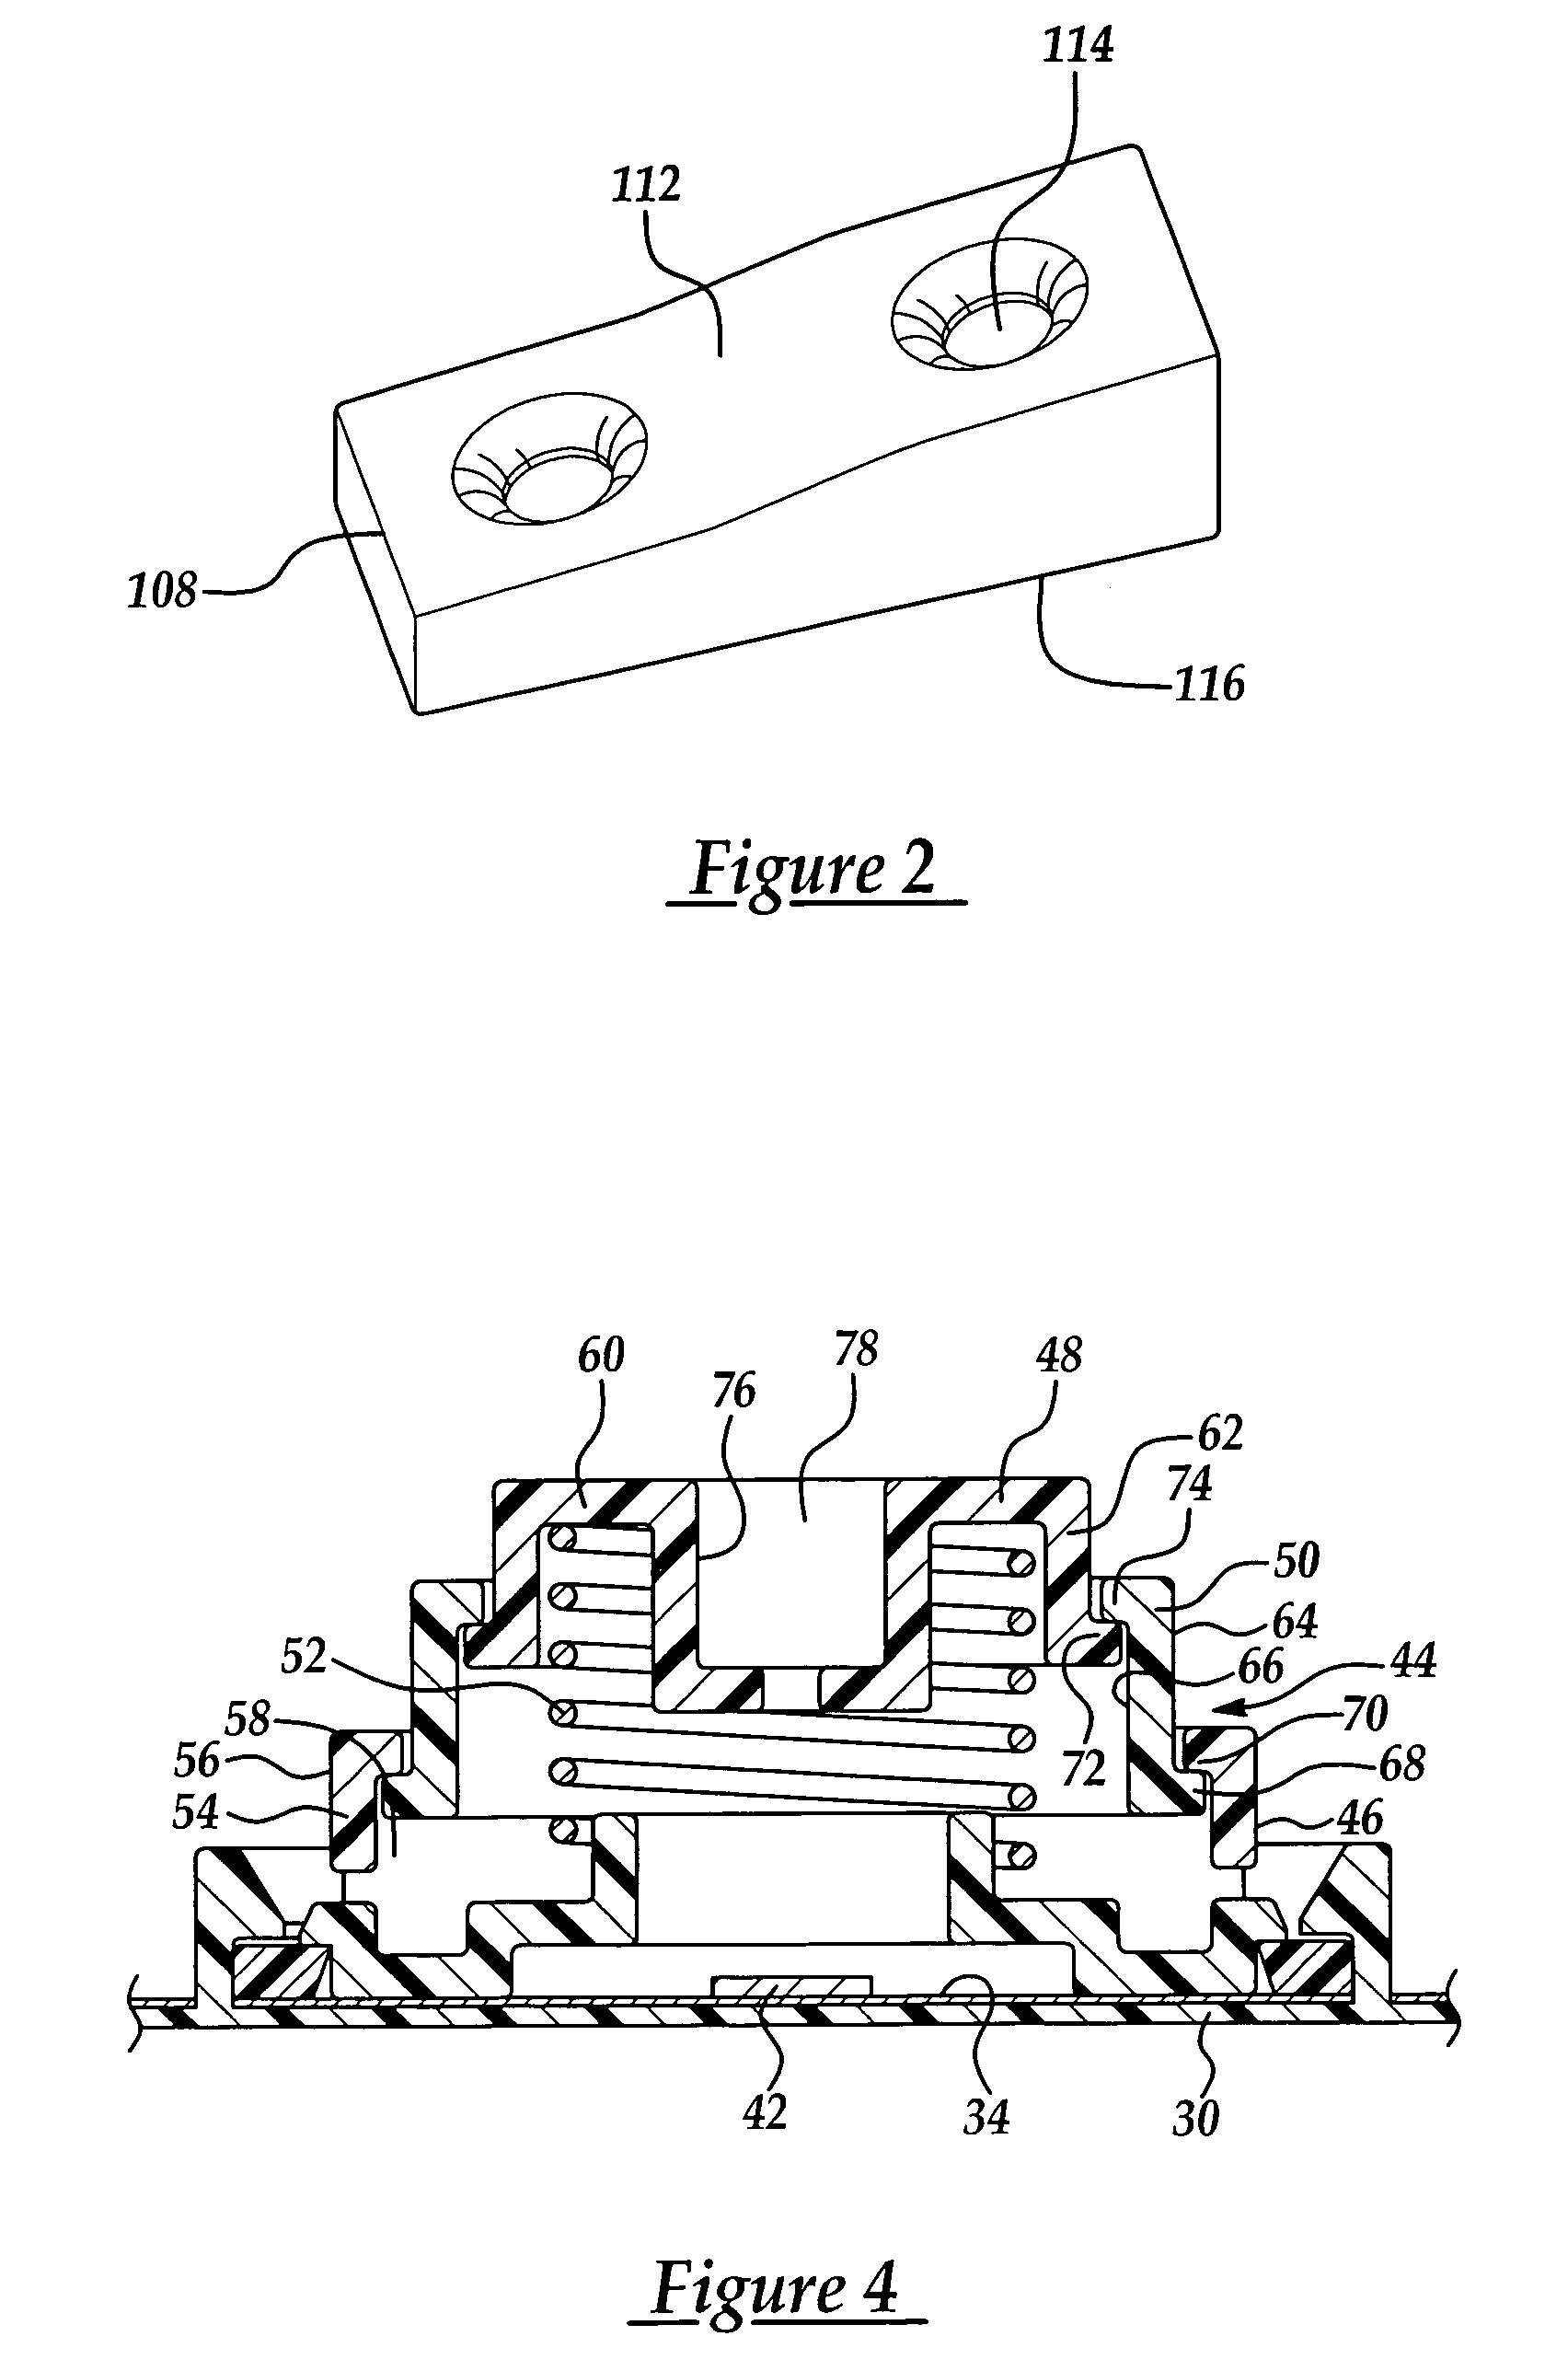 Vehicle seat assembly having a vehicle occupant sensing system and a seat cushion insert positioned therein